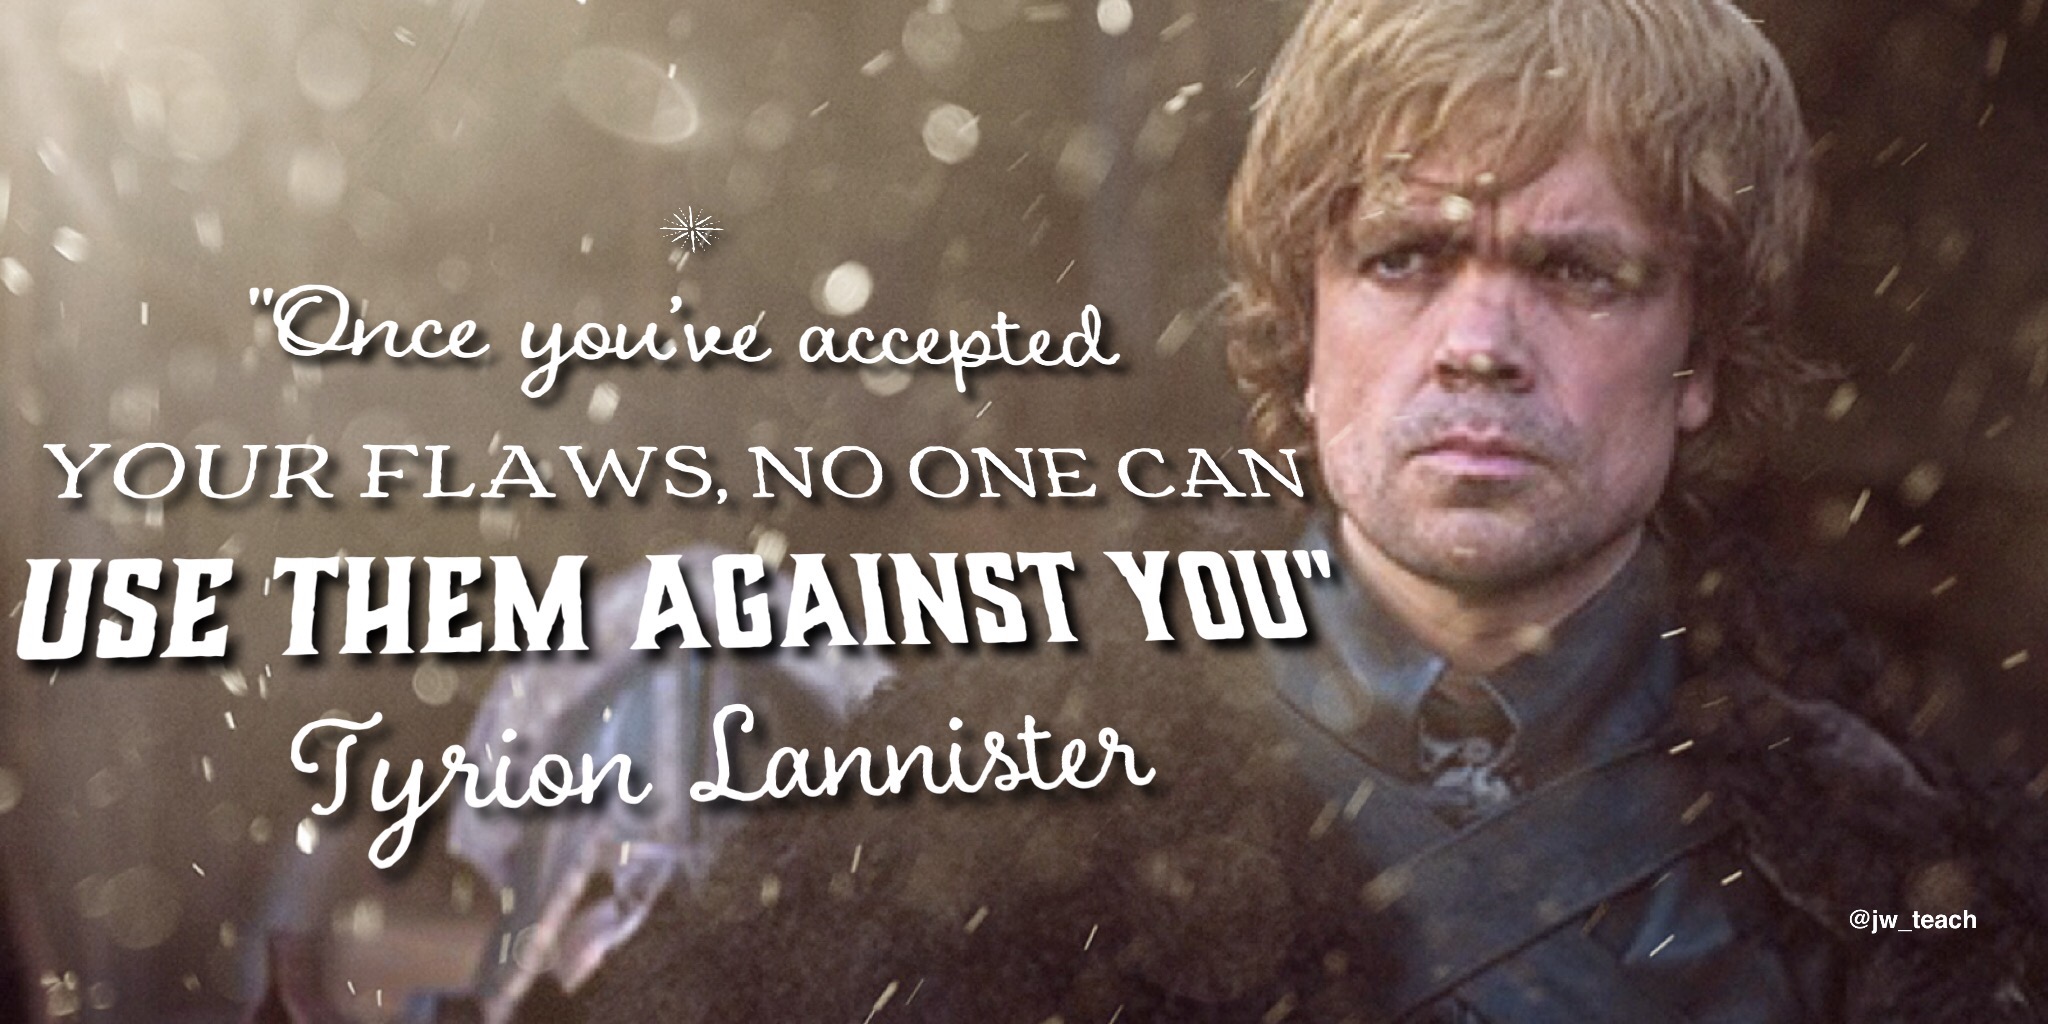 "Once you’ve accepted your flaws, no one can use them against you" Game of Thrones Quote